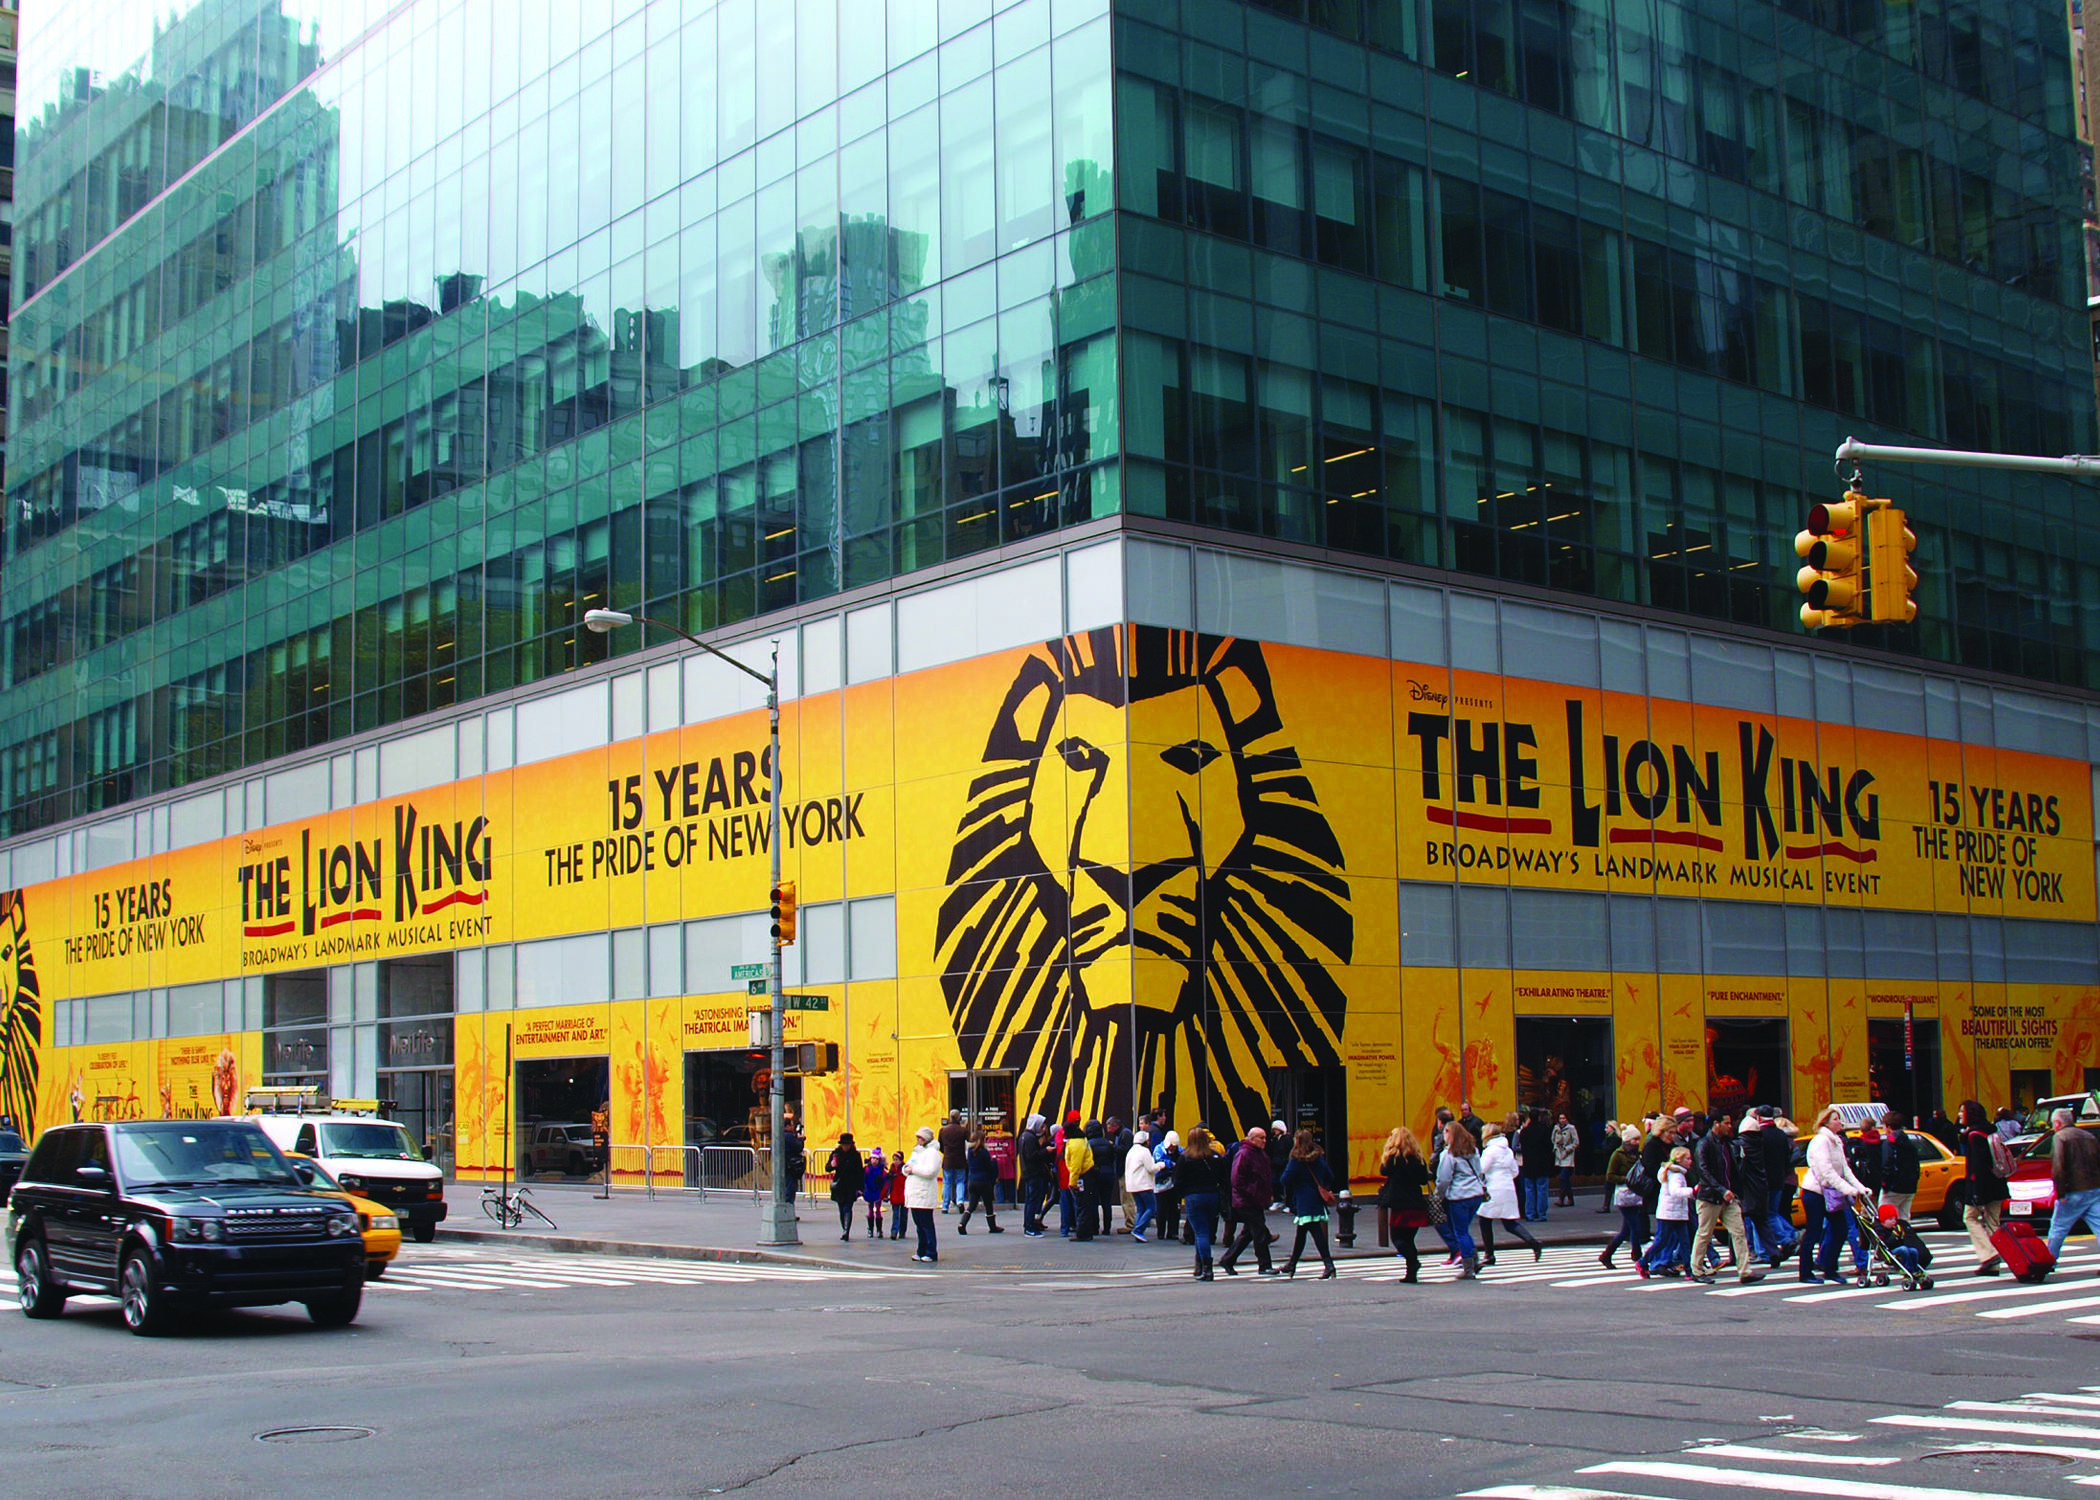 Disney Theatricals Celebrate 15 Years Of The Lion King with “Inside The Lion King” Exhibit in NYC